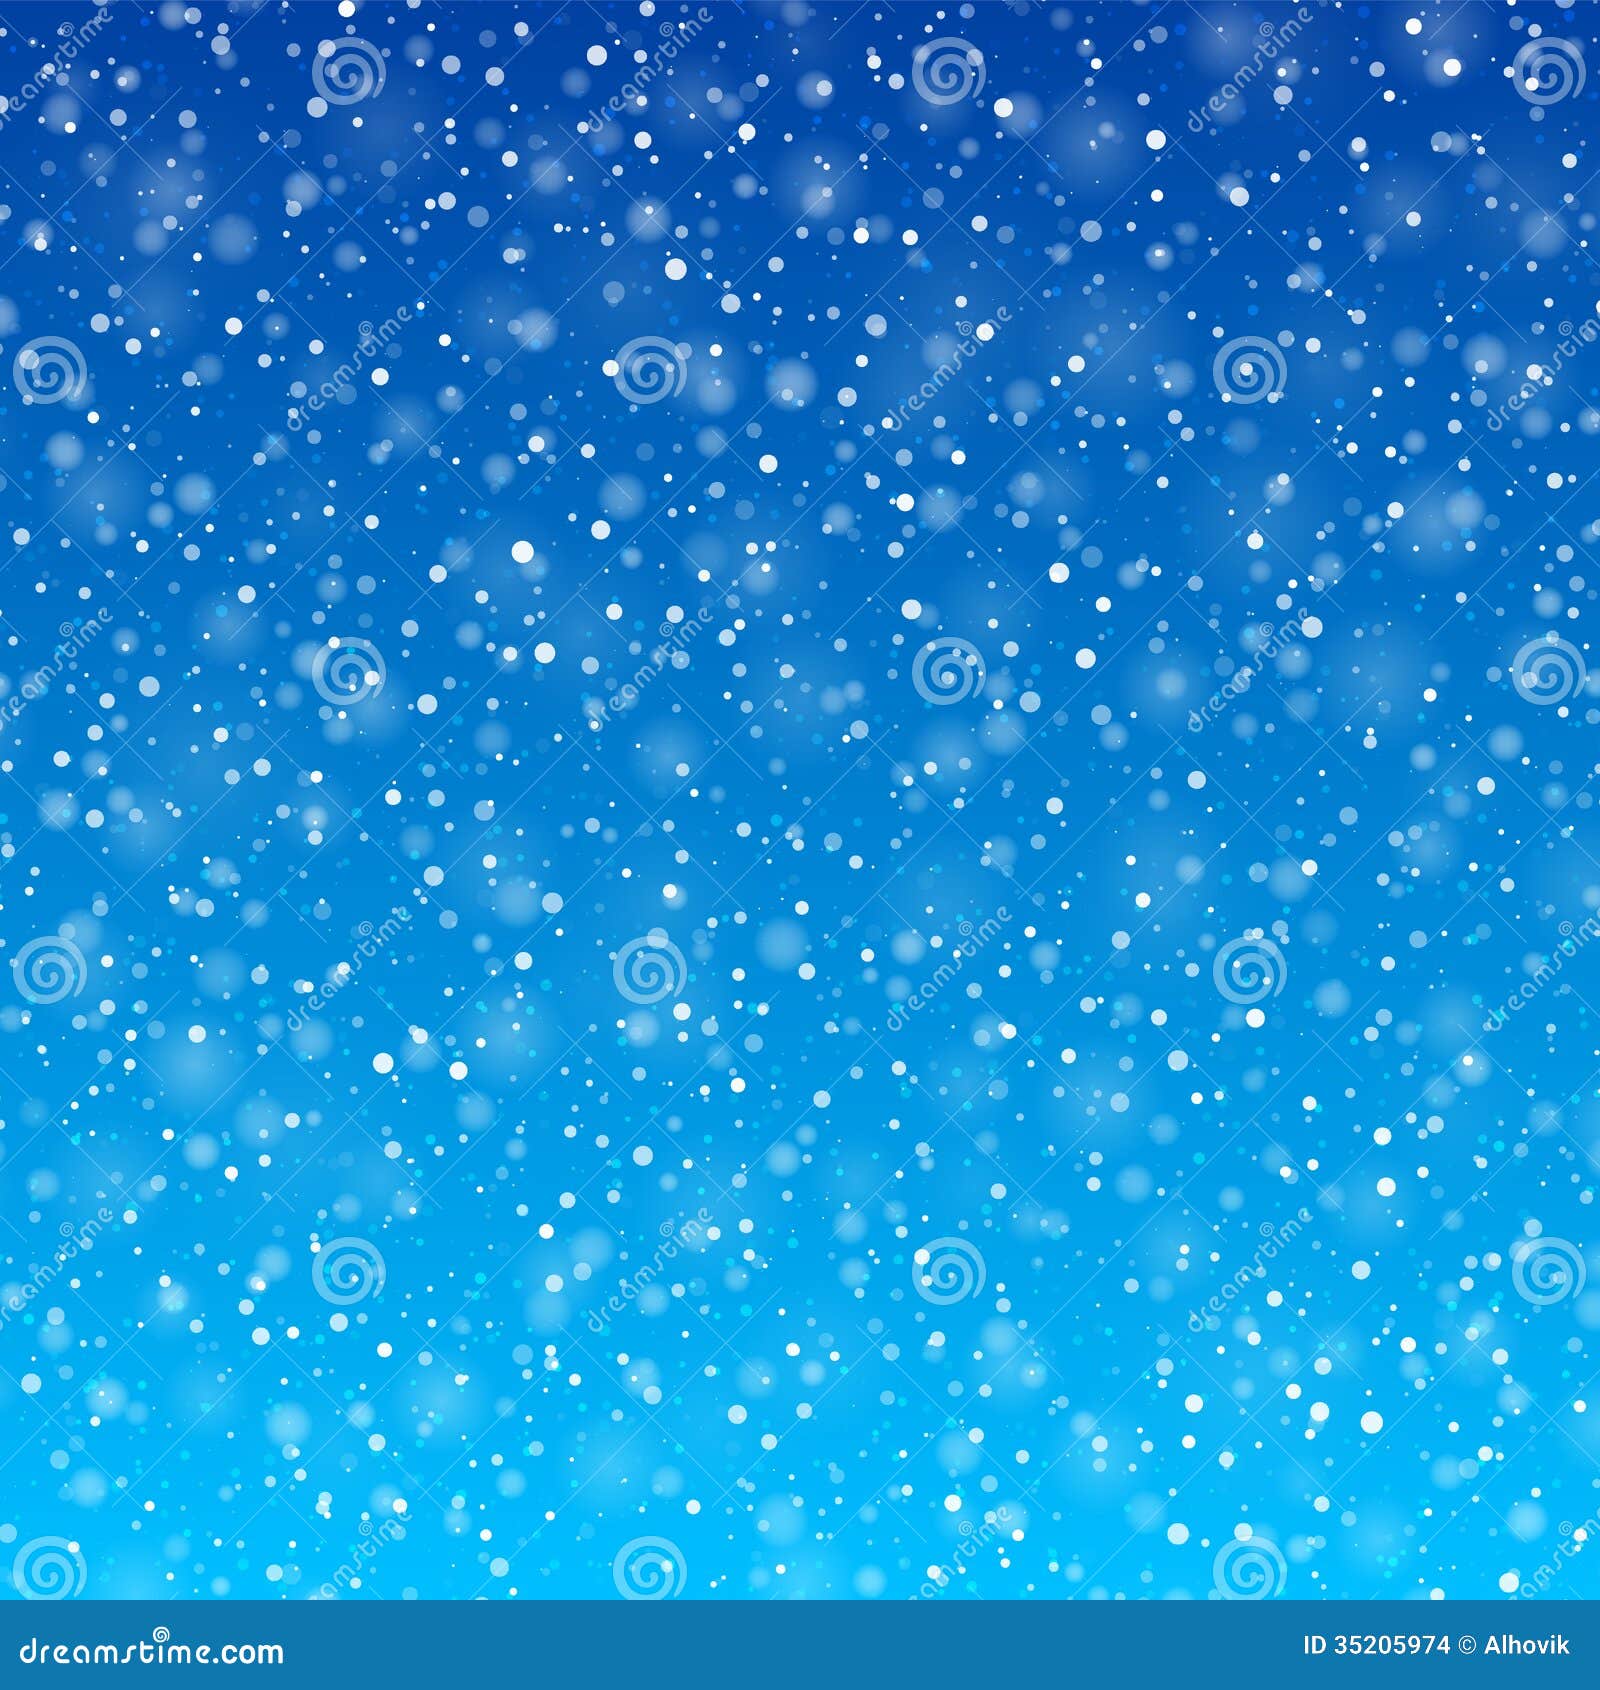 clipart of snow falling - photo #38